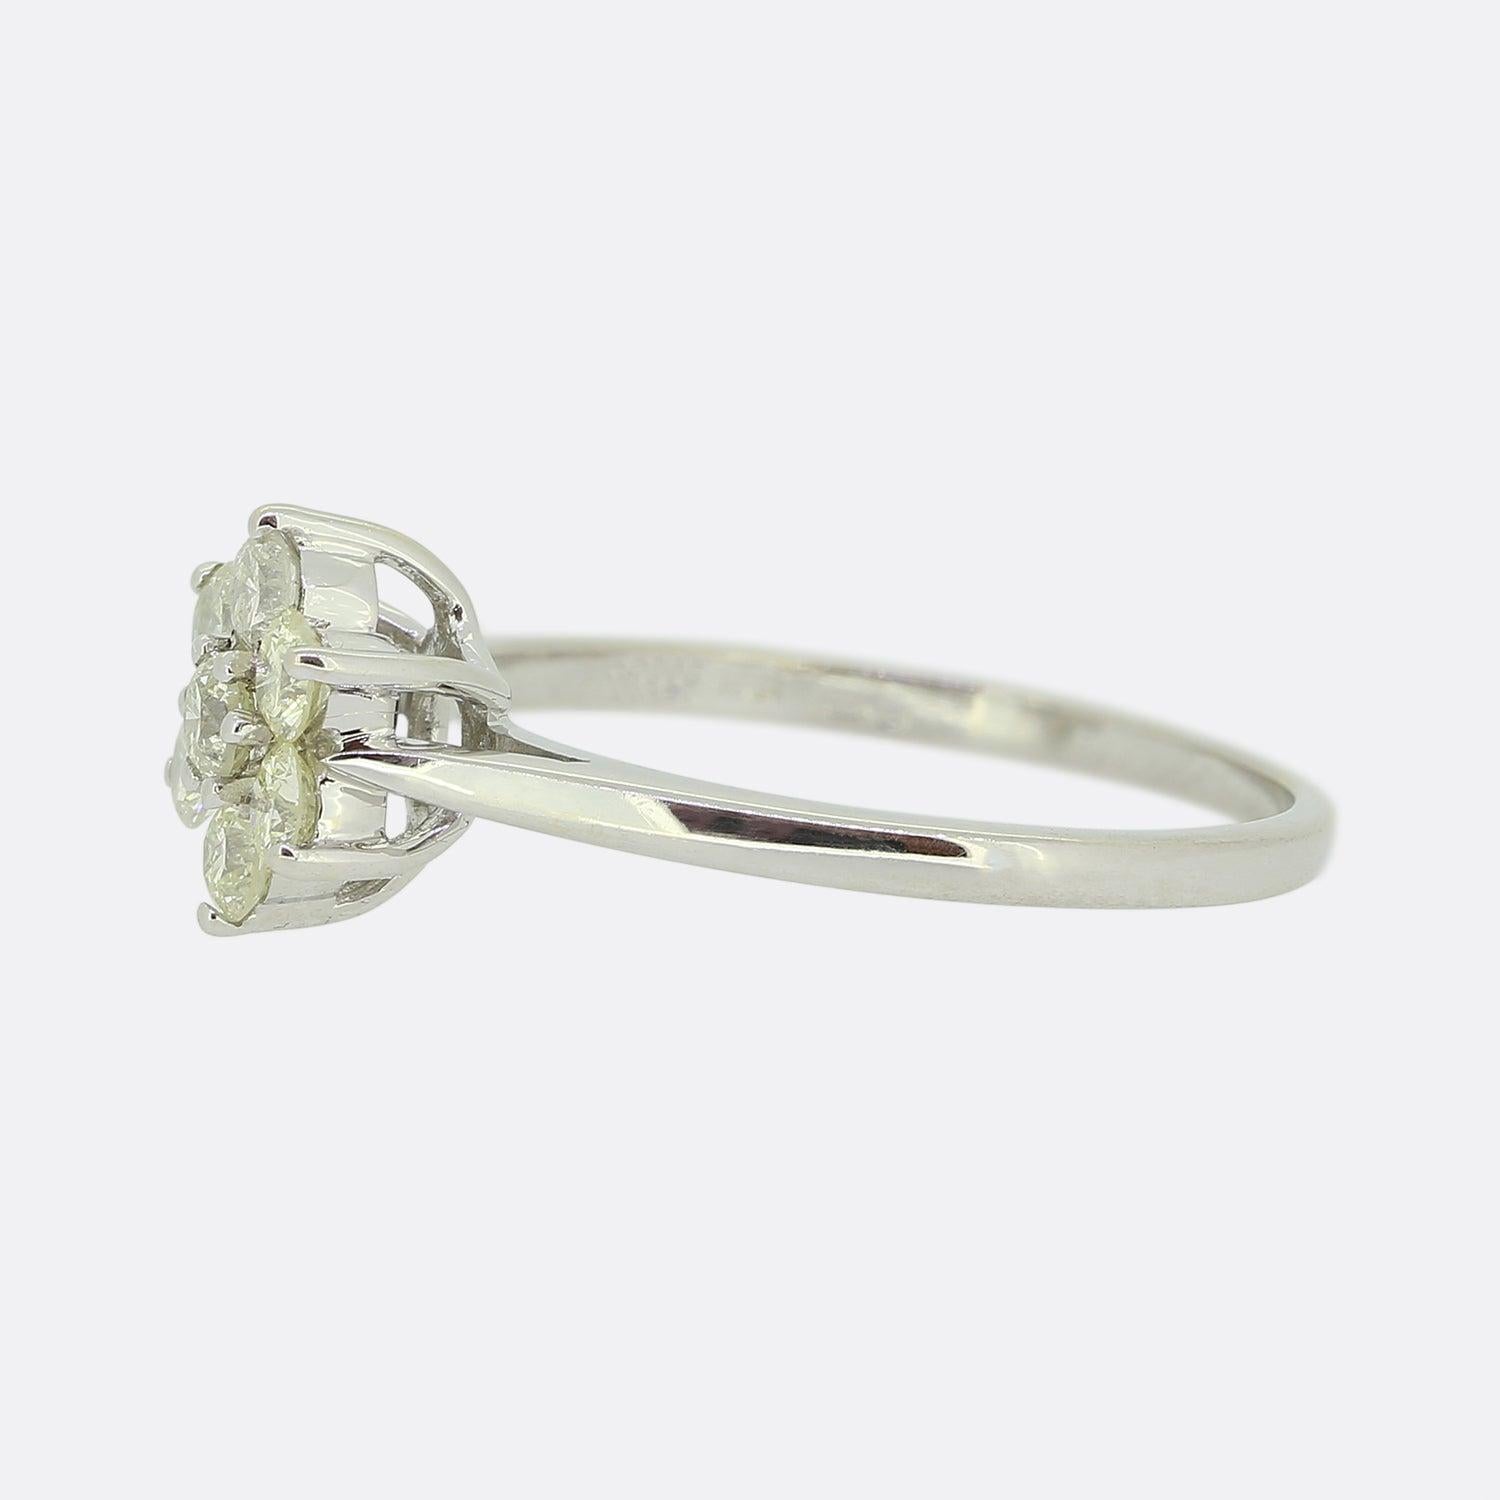 Here we have a delightful vintage diamond cluster ring. An 18ct white gold mount plays host a daisy cluster of round brilliant cut diamonds; each of which has been individually claw set and collectively sit atop a plain polished shank. 

Condition: